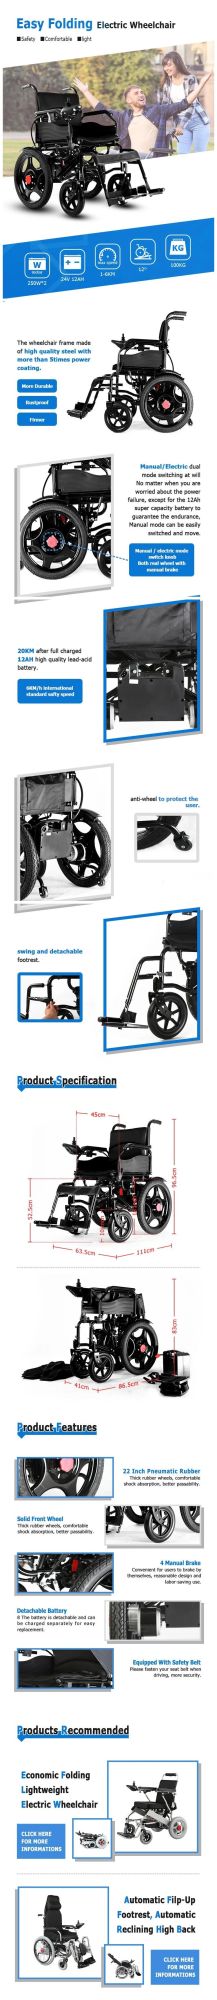 18 Inch Foldable Wheel Chair Multi-Function Easy Clearing Electric Wheelchair